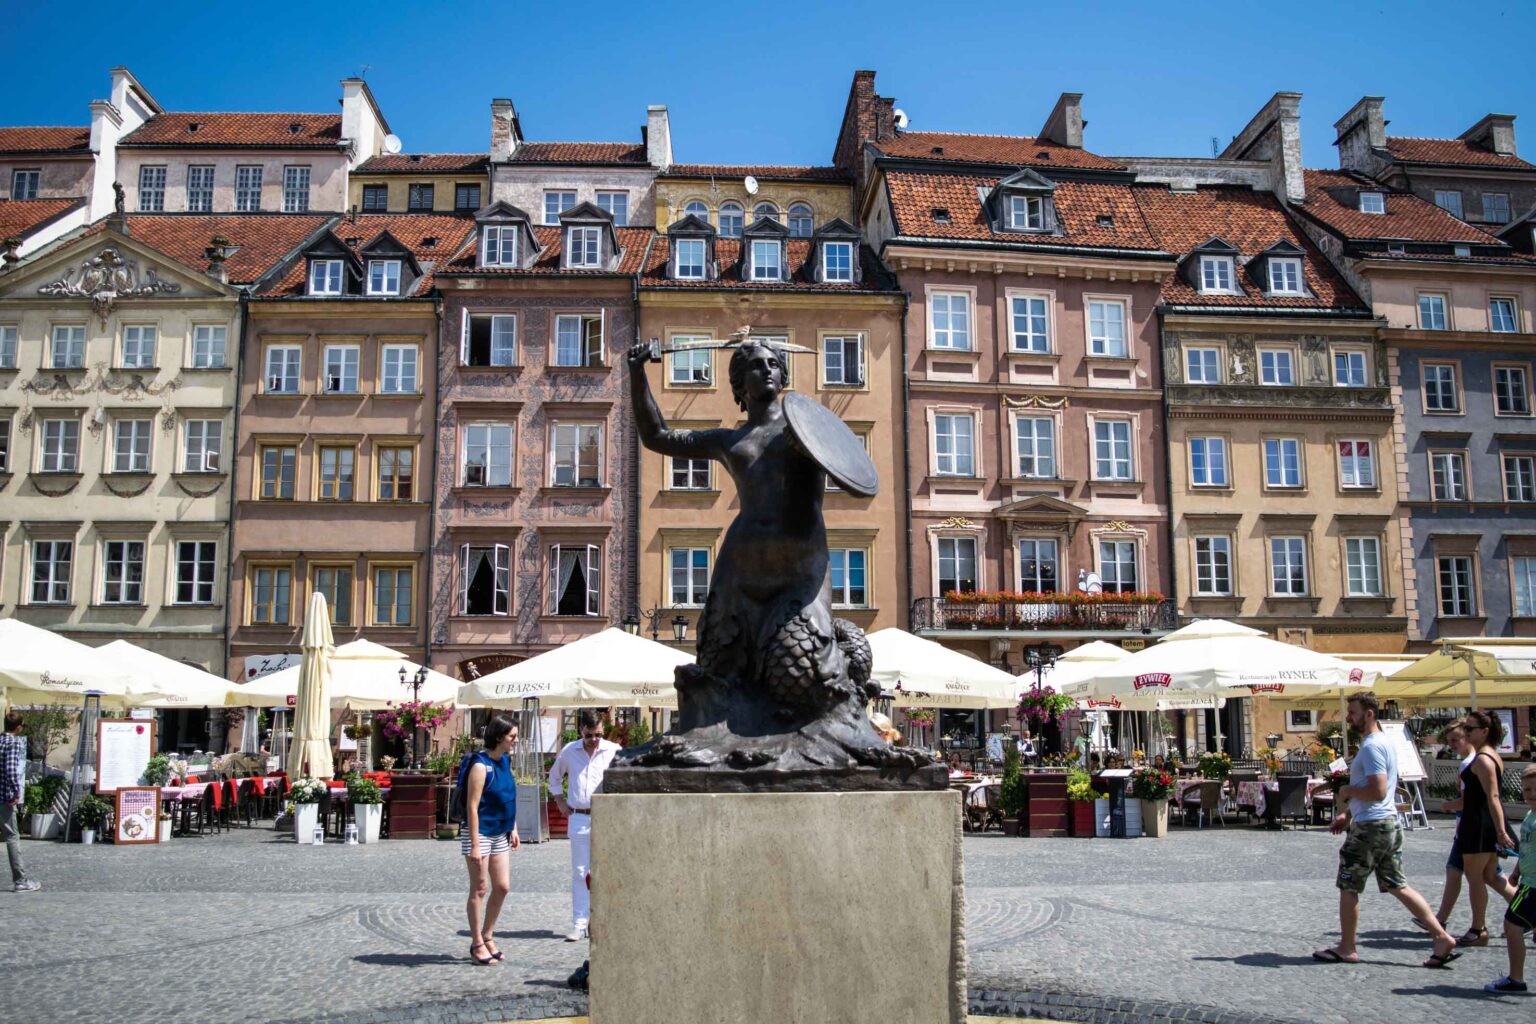 Air-quality sensors in Warsaw to improve – largest network in Europe